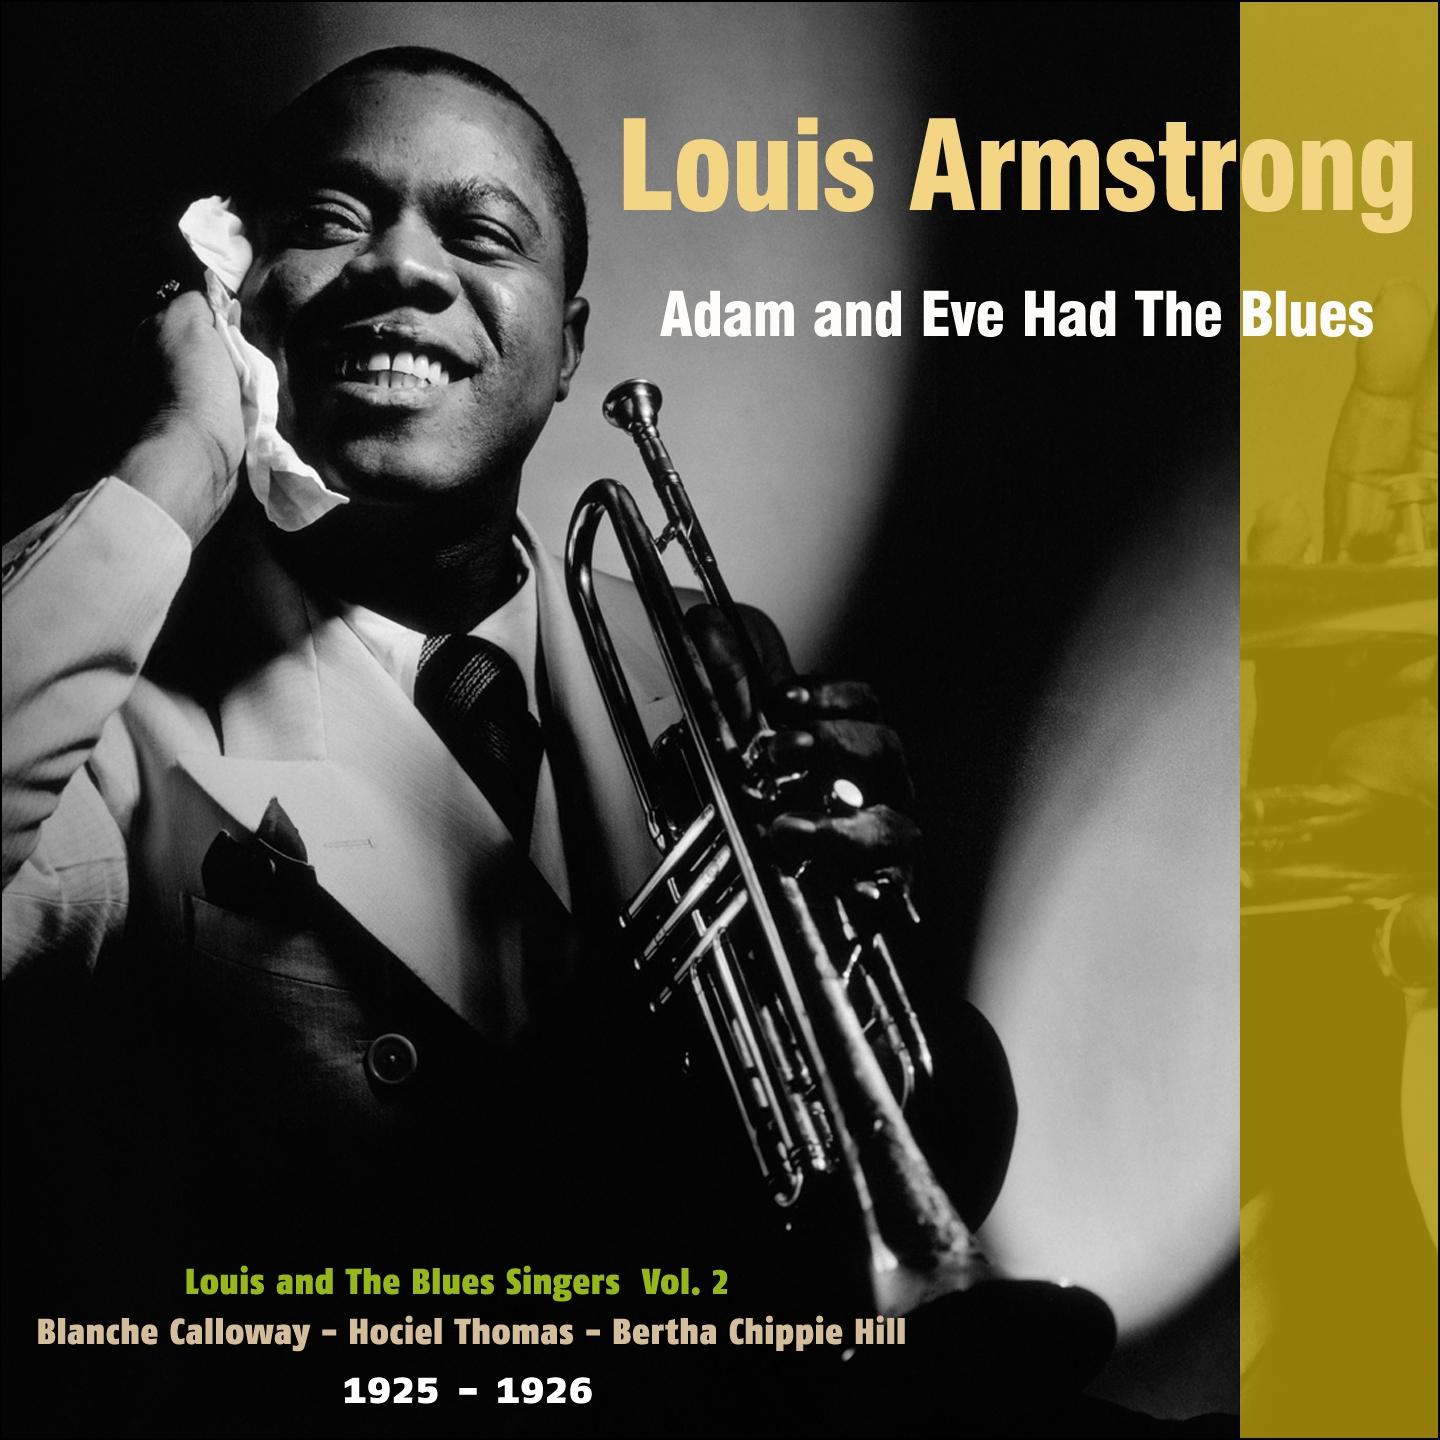 Adam and Eve Had the Blues (Louis and The Blues Singers, Vol. 2 - 1925 - 1926)专辑